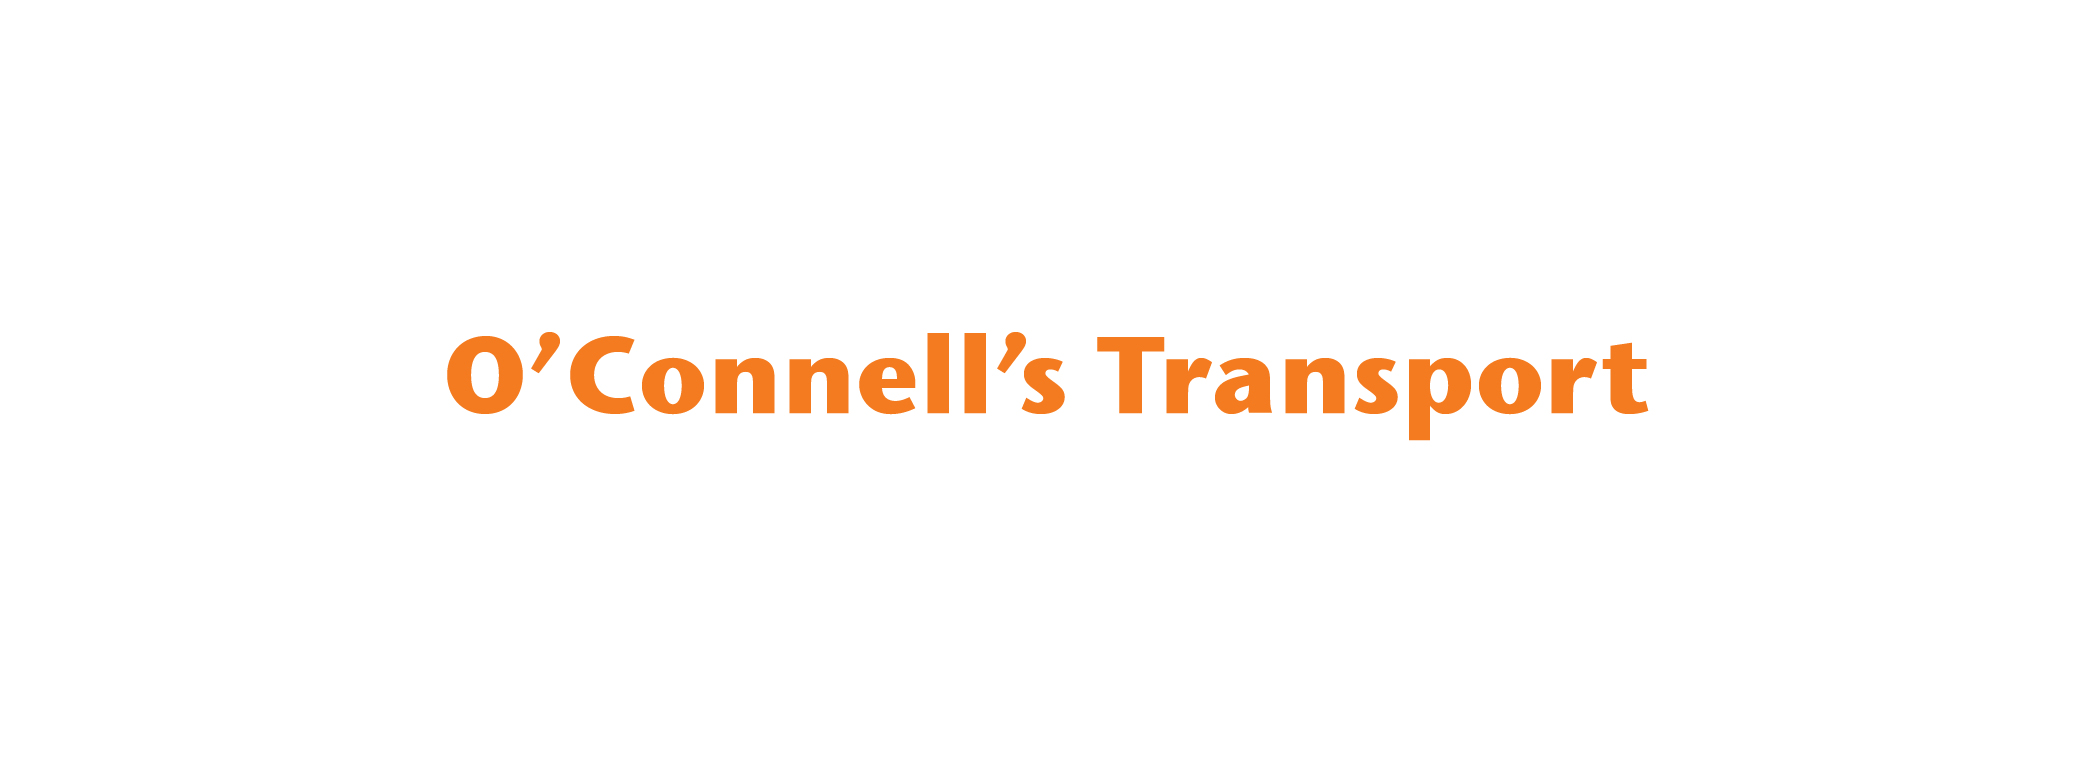 O'Connell's Transport